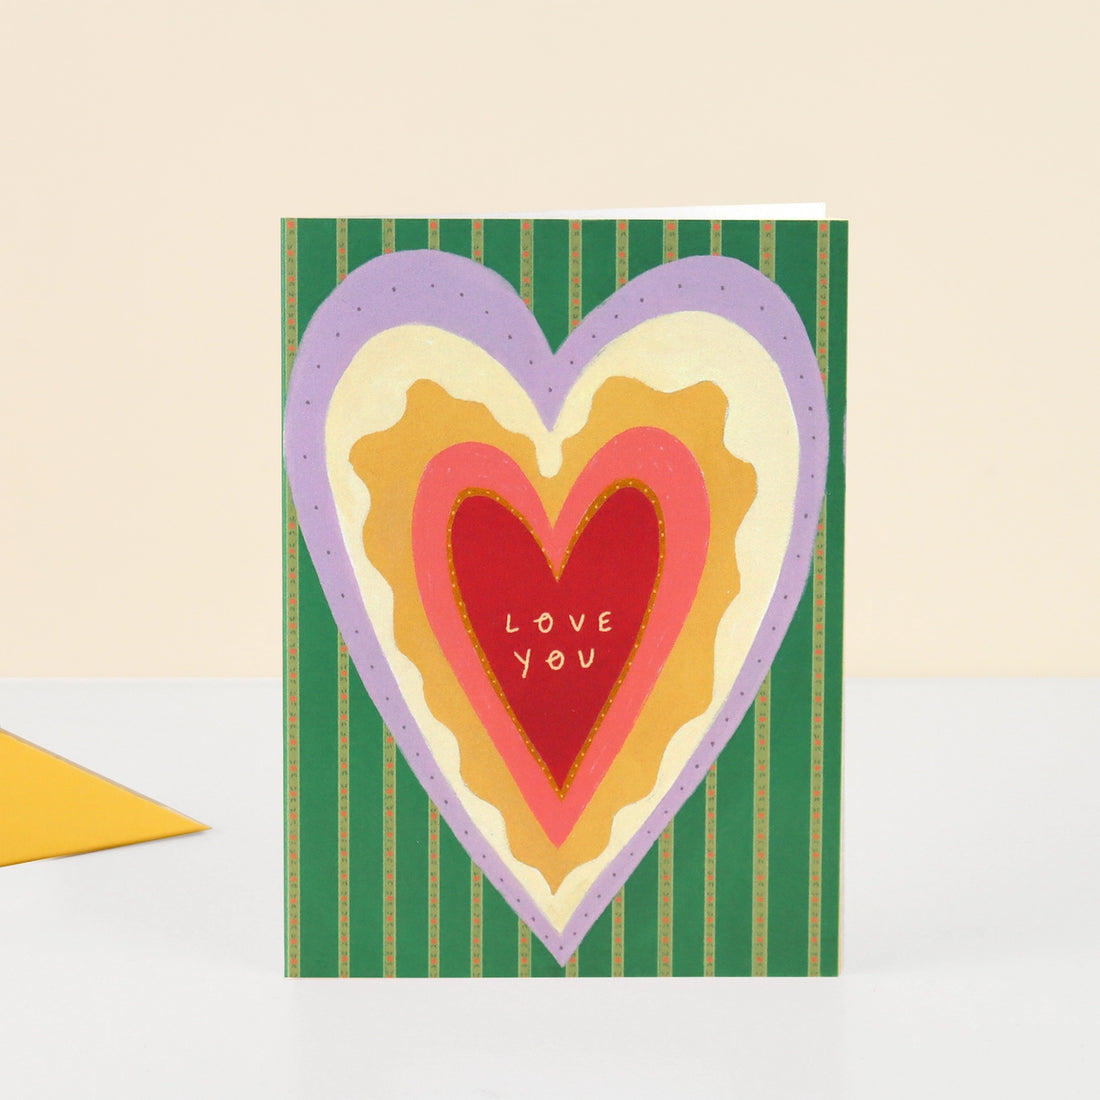 Giant Heart 'Love You' card by Little Black Cat